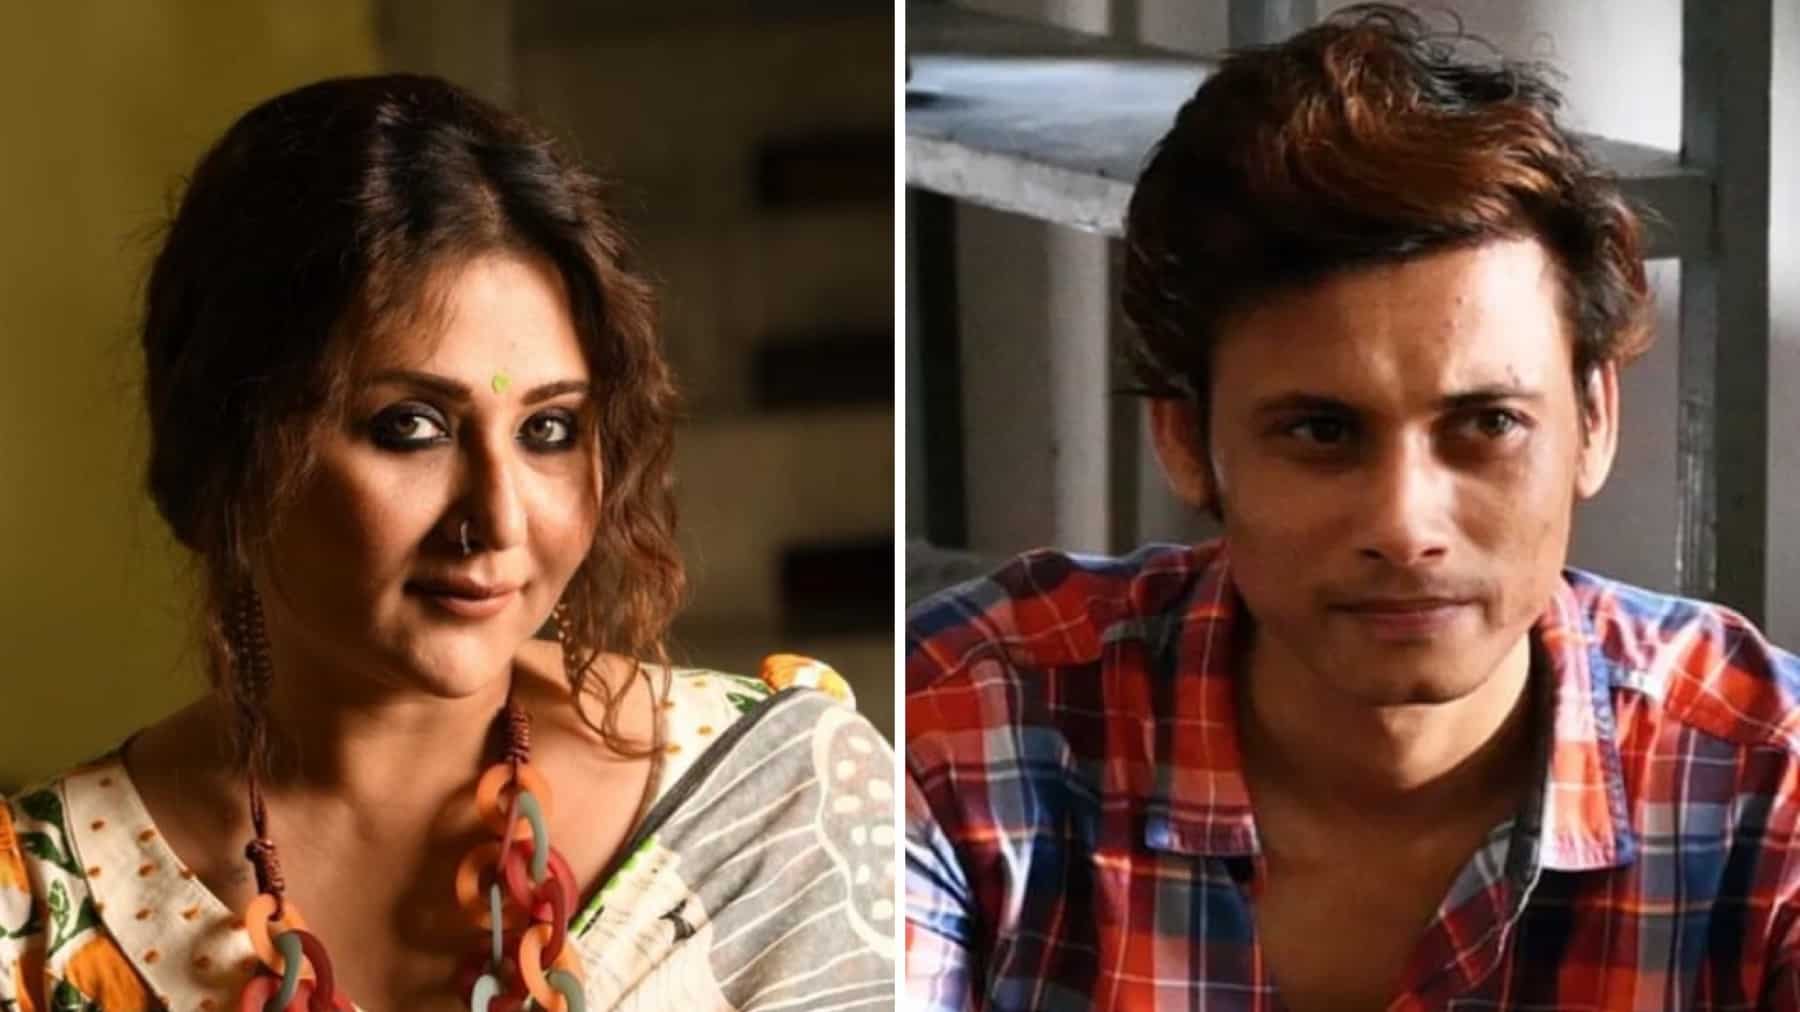 https://www.mobilemasala.com/movies/Exclusive-Swastika-Mukherjee-teams-up-with-Sayantan-Ghosal-for-a-web-series-and-here-is-what-it-is-based-on-i223042